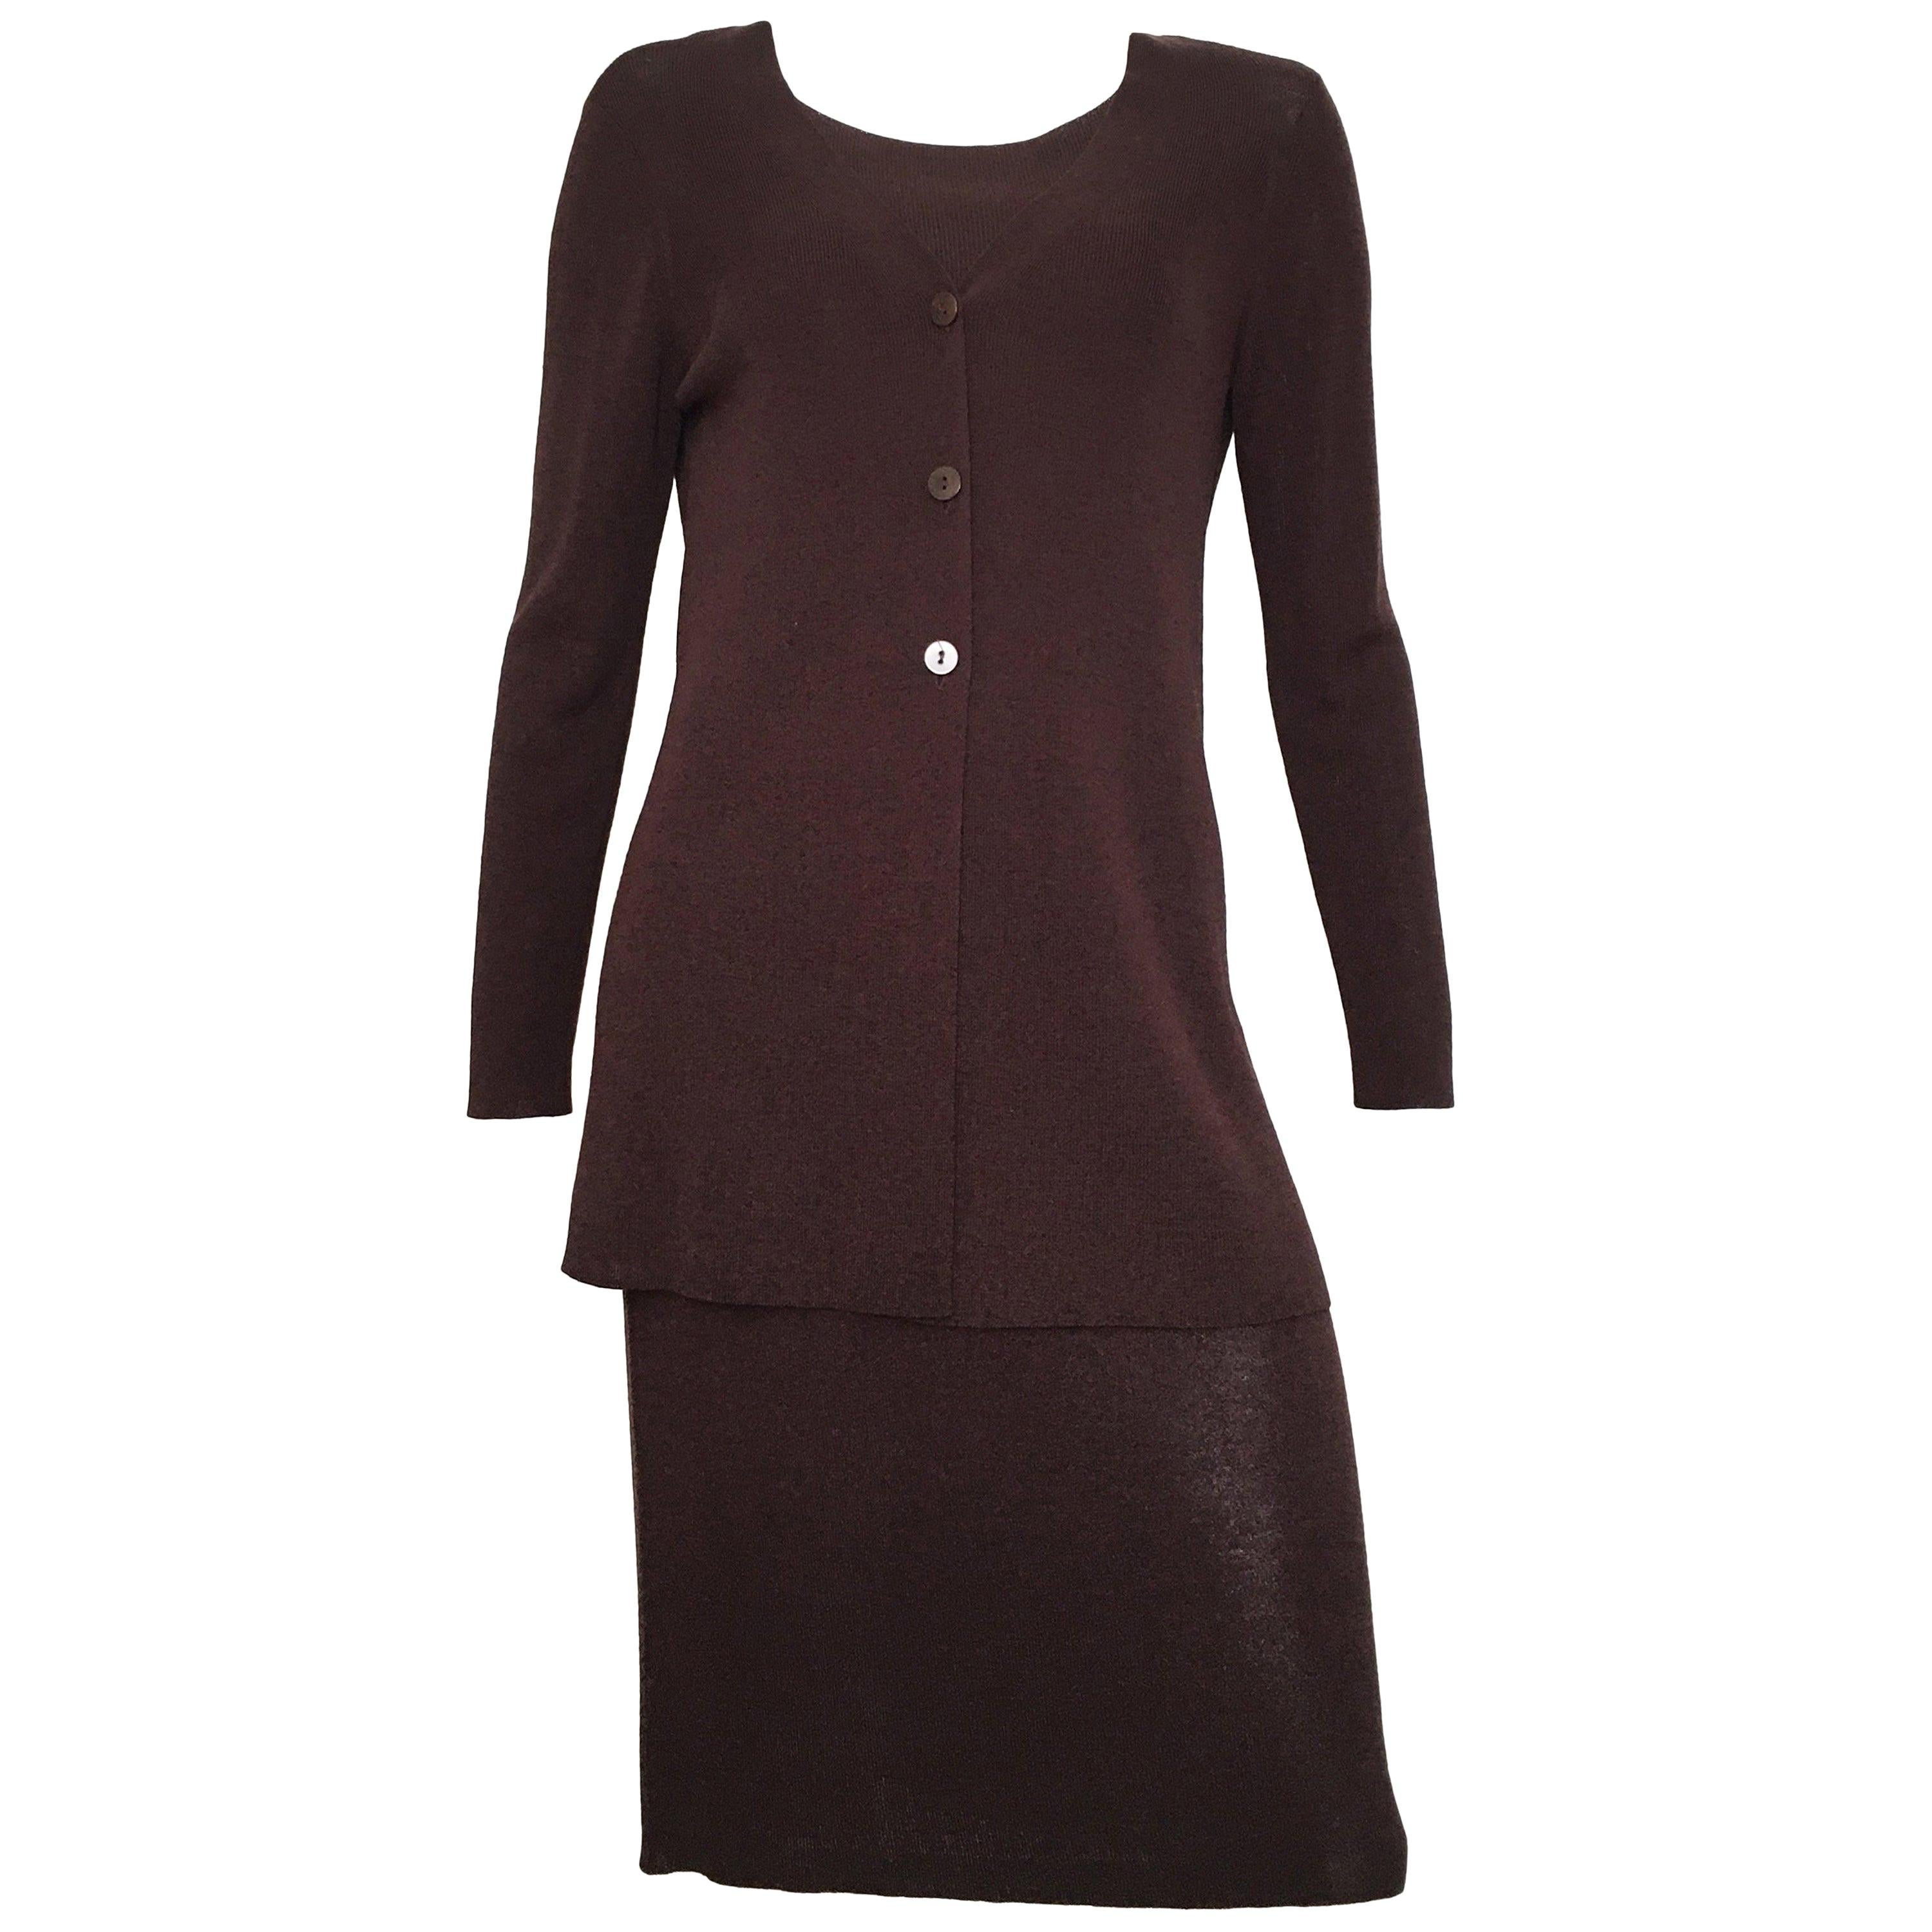 Saks Fifth Avenue Brown Knit Sleeveless Dress & Jacket Size 4/6. For Sale